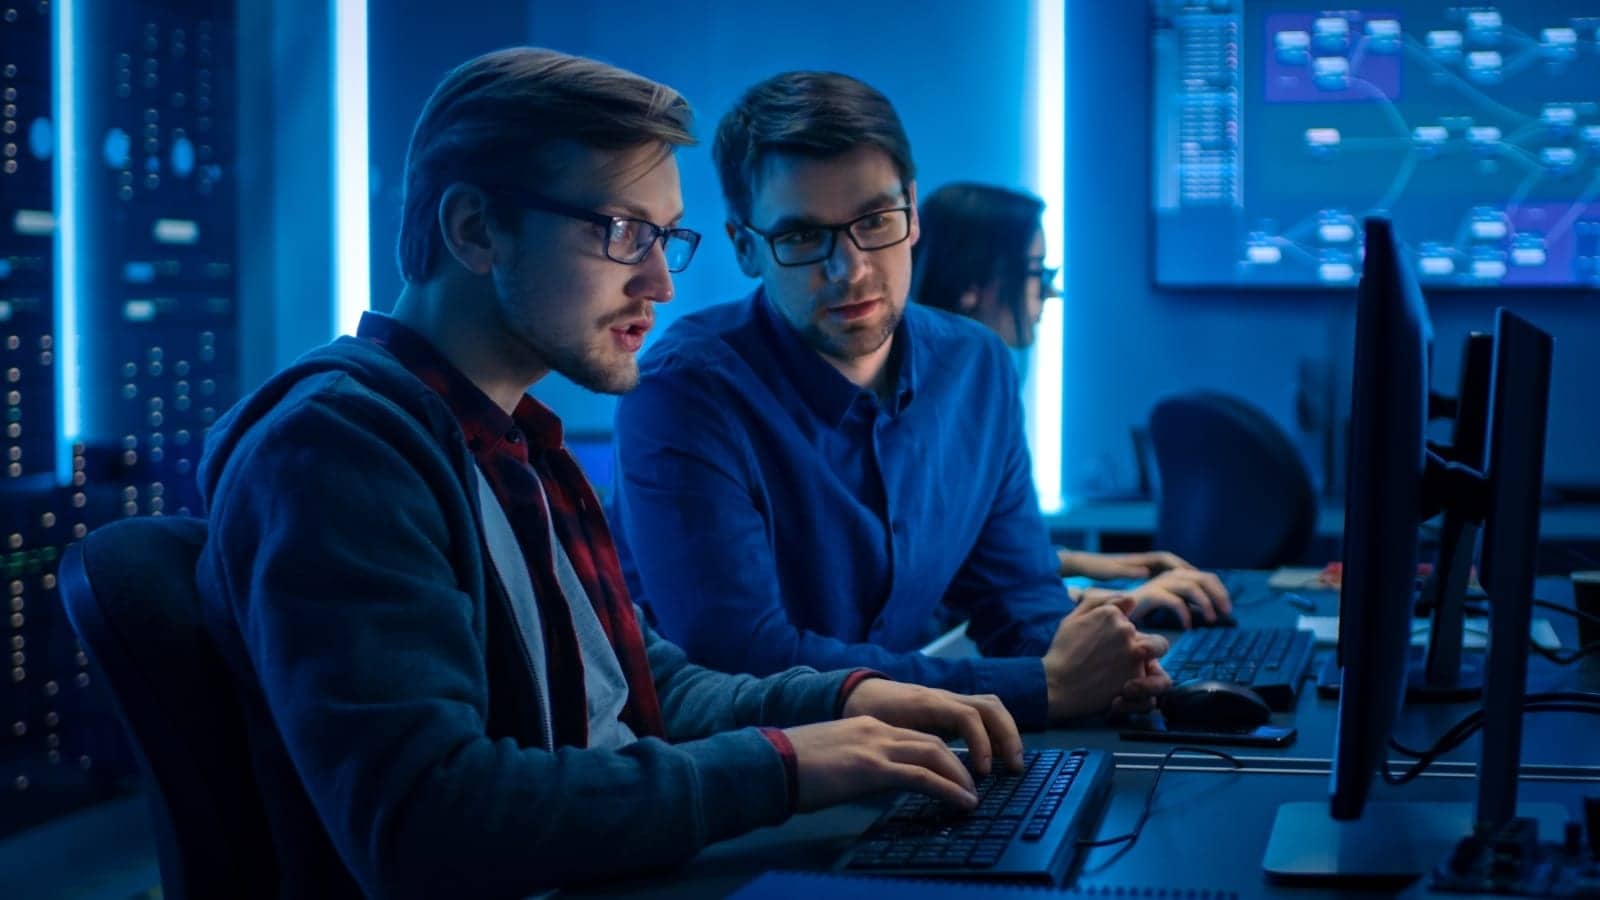 two men in the technology industry looking at a computer screen in a dark blue tinted room